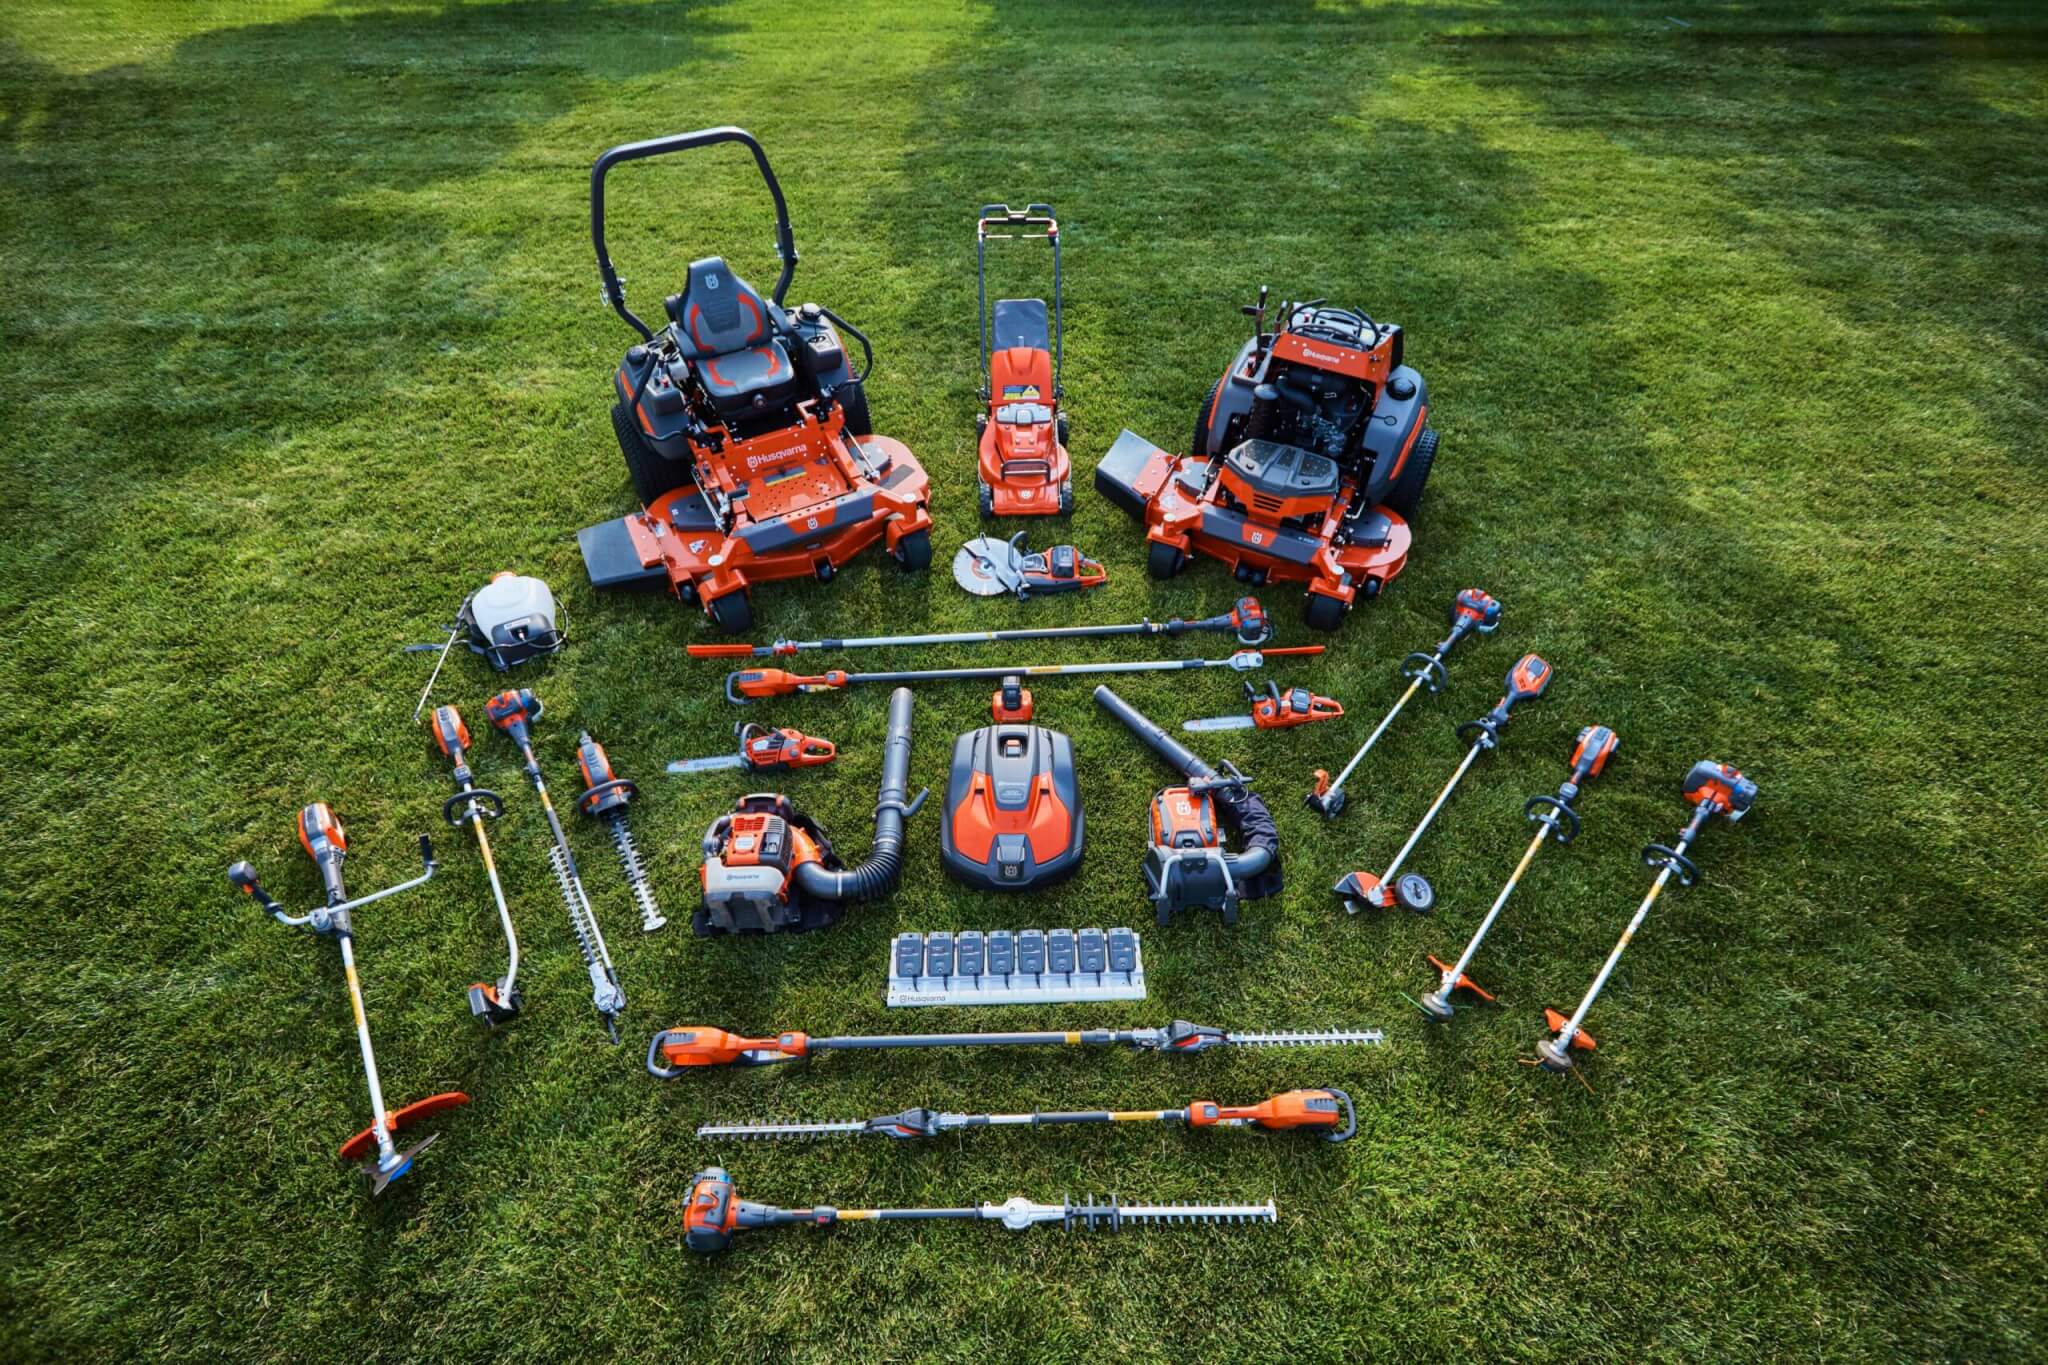 Husqvarna’s landscaping and lawn care